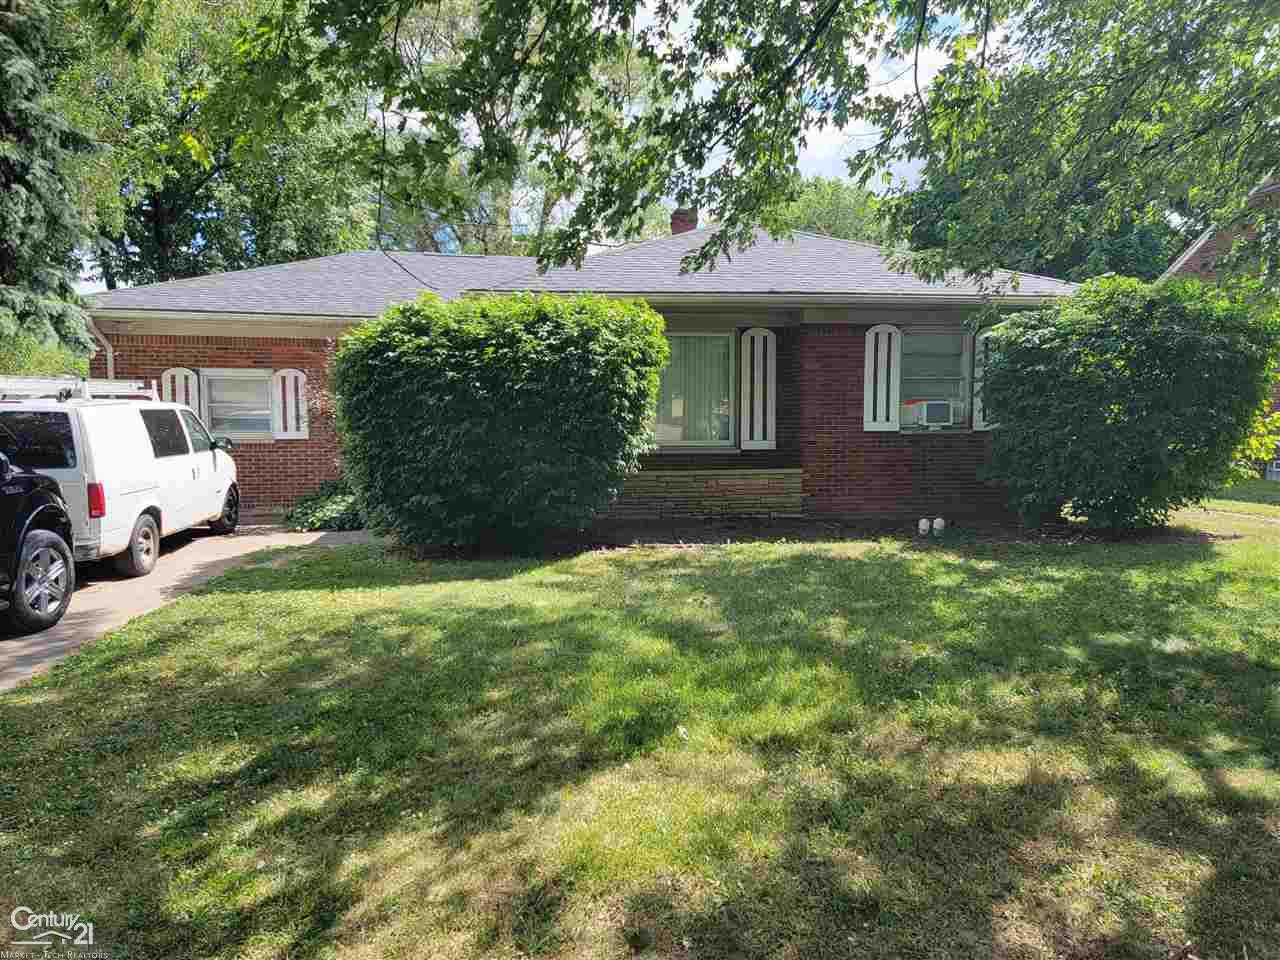 Large all brick ranch.  House needs updating.  Seller started, but funds ran short.  Newer furnace and hot water heater. A lot of house for the money!  Great starter or flip!